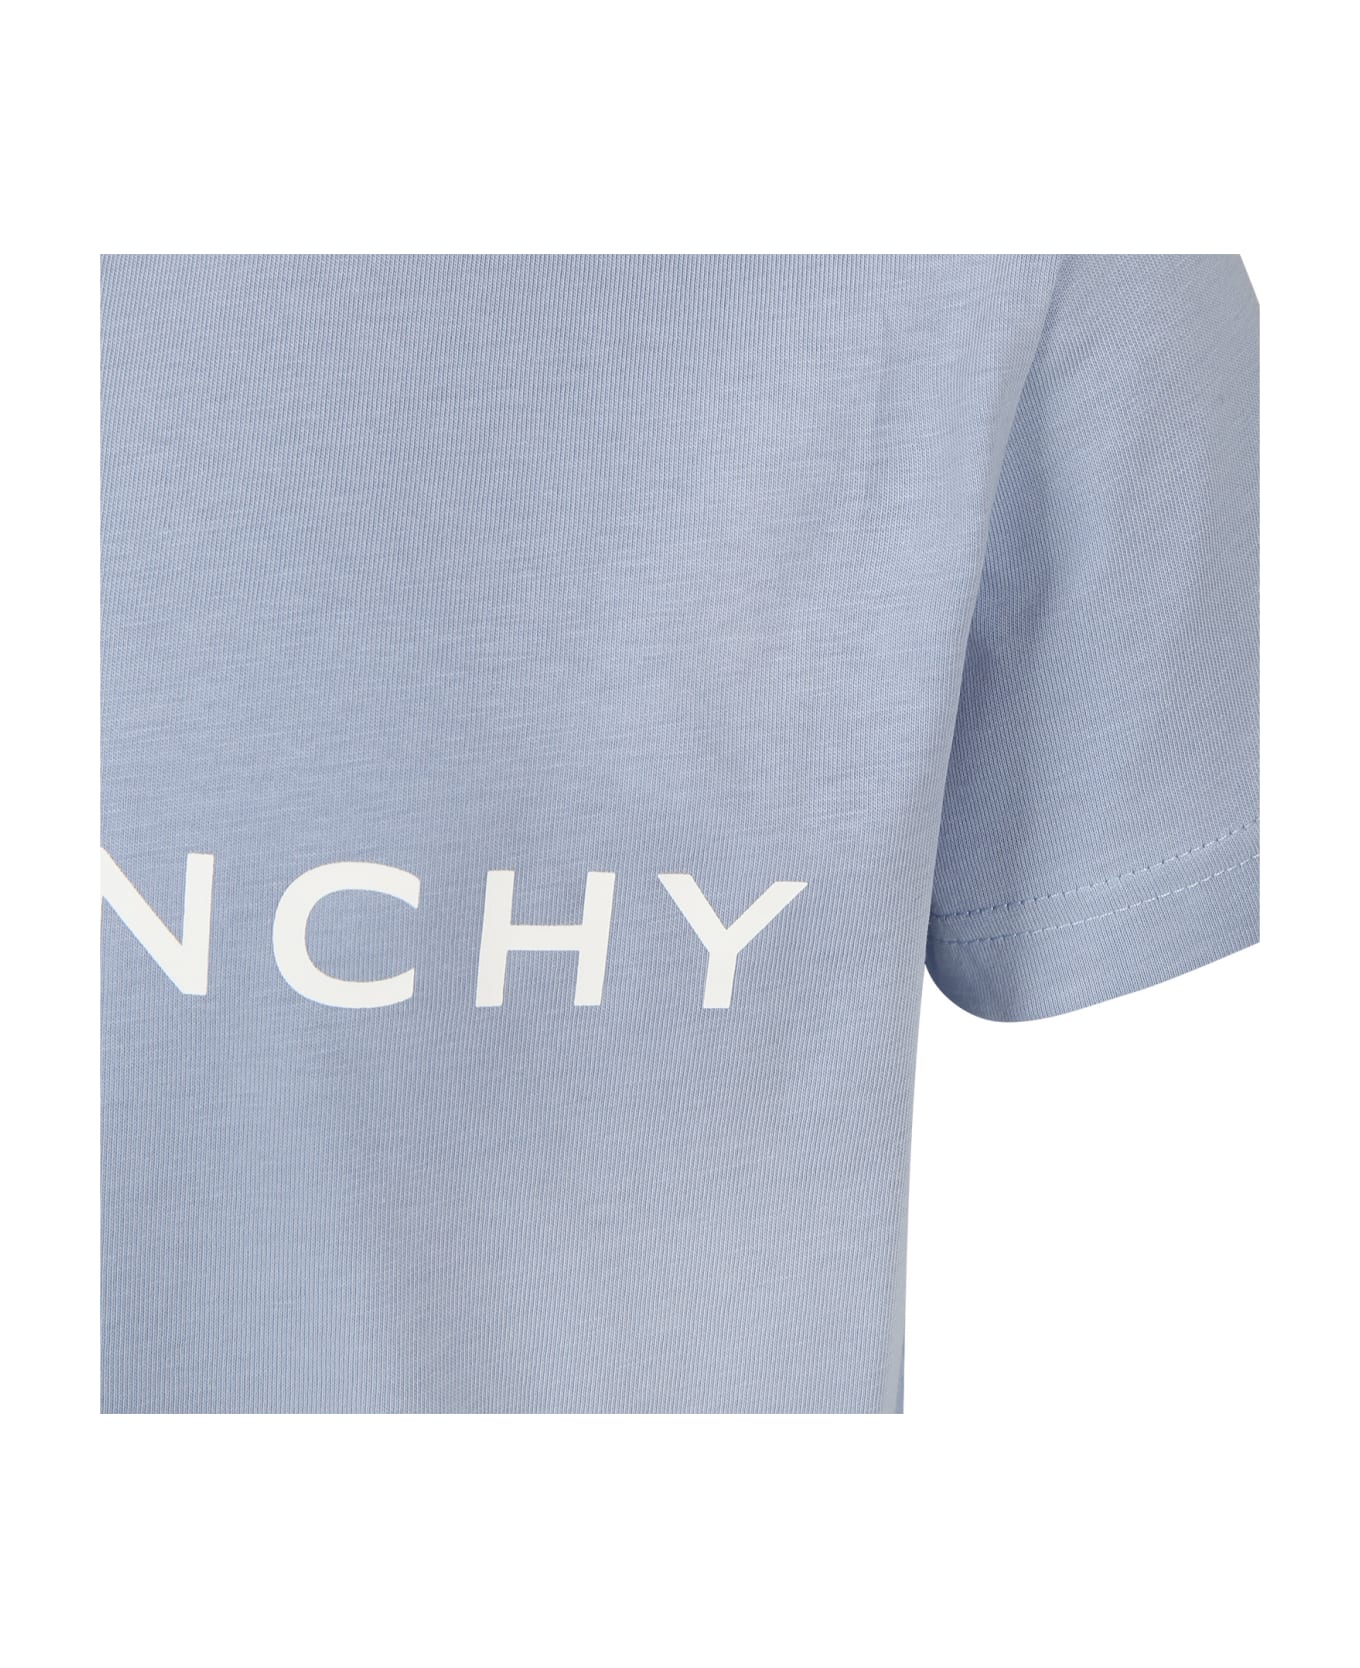 Givenchy Light Blue T-shirt For Boy With Logo - Light Blue